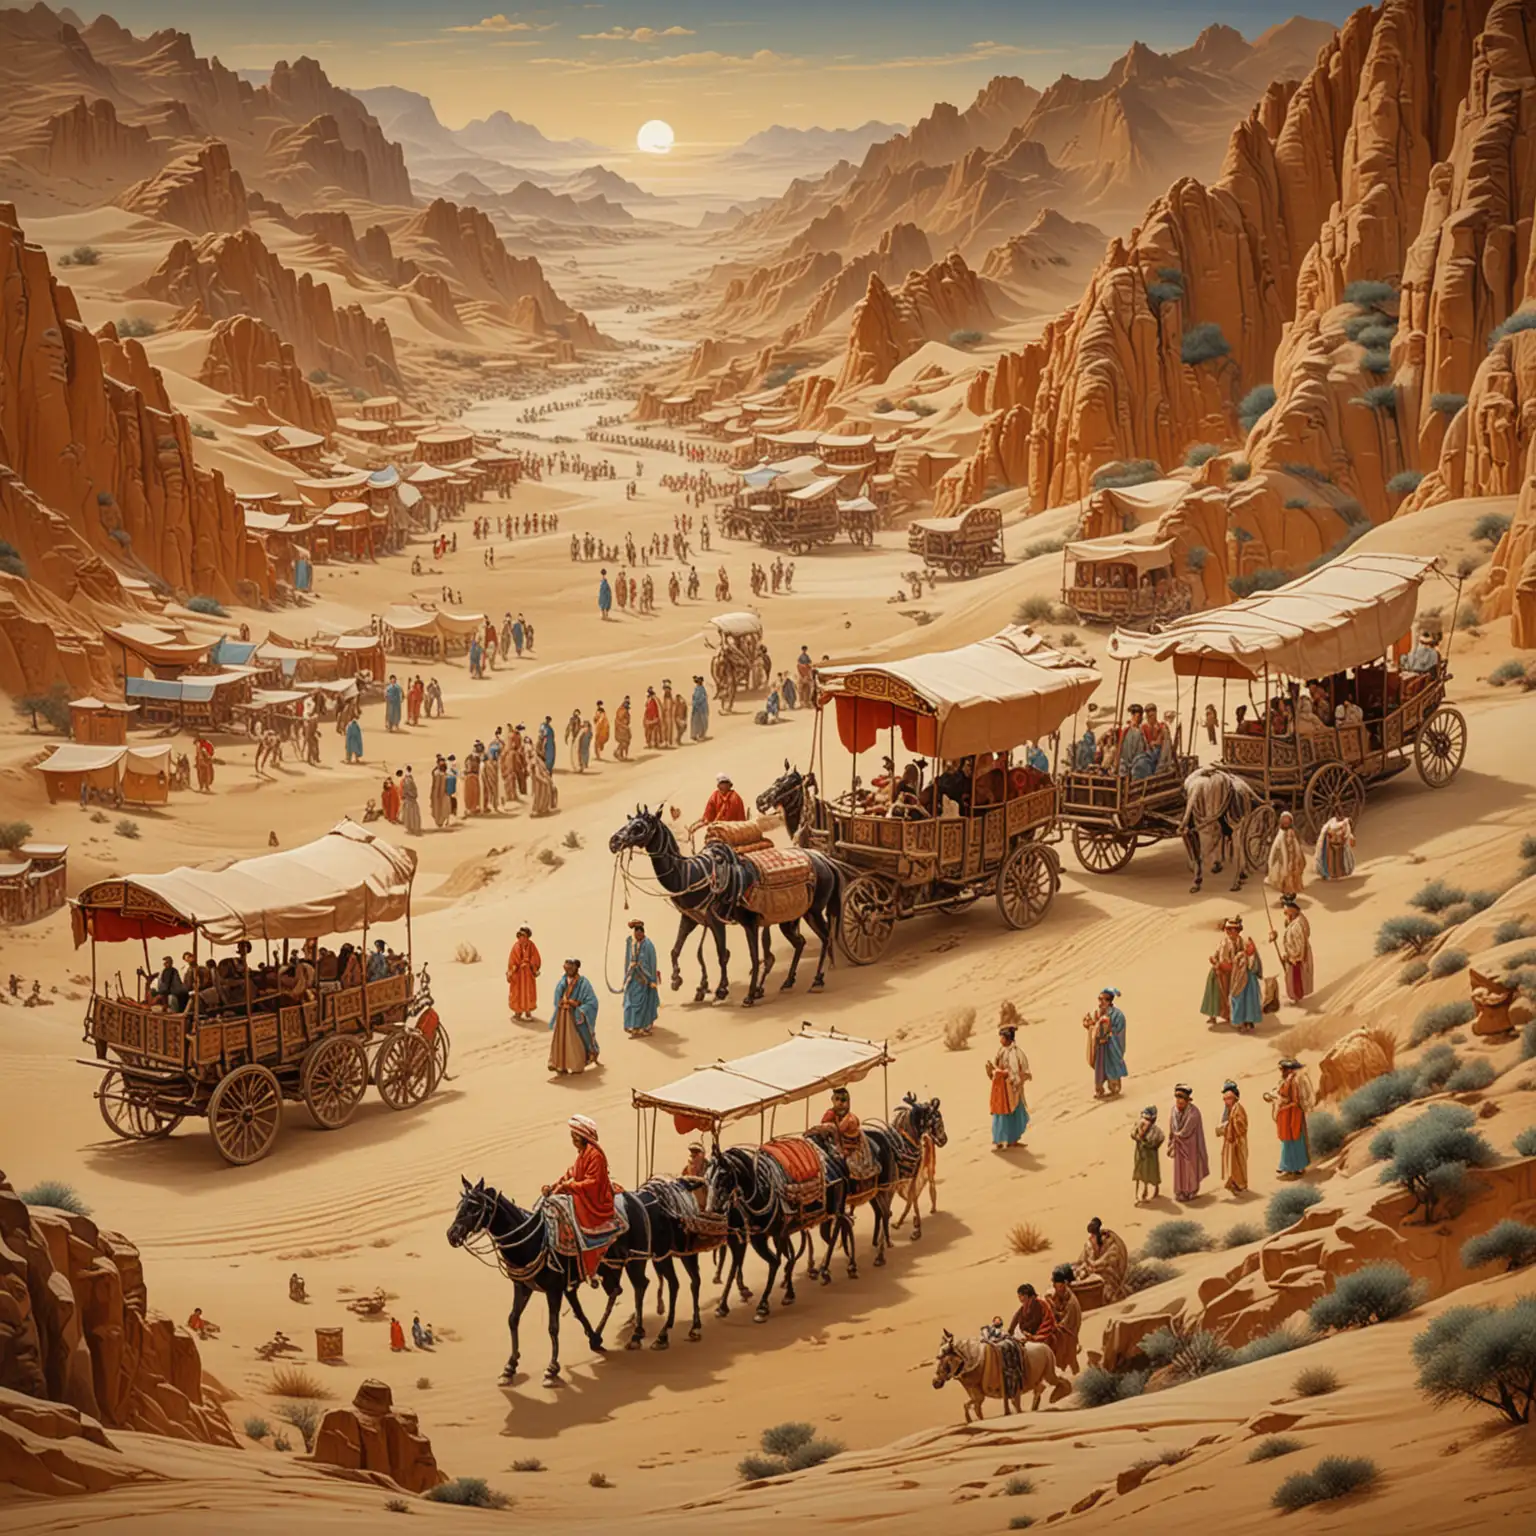 Silk-Road-Oasis-Market-at-Sunset-Traditional-Merchants-and-Golden-Sand-Dunes